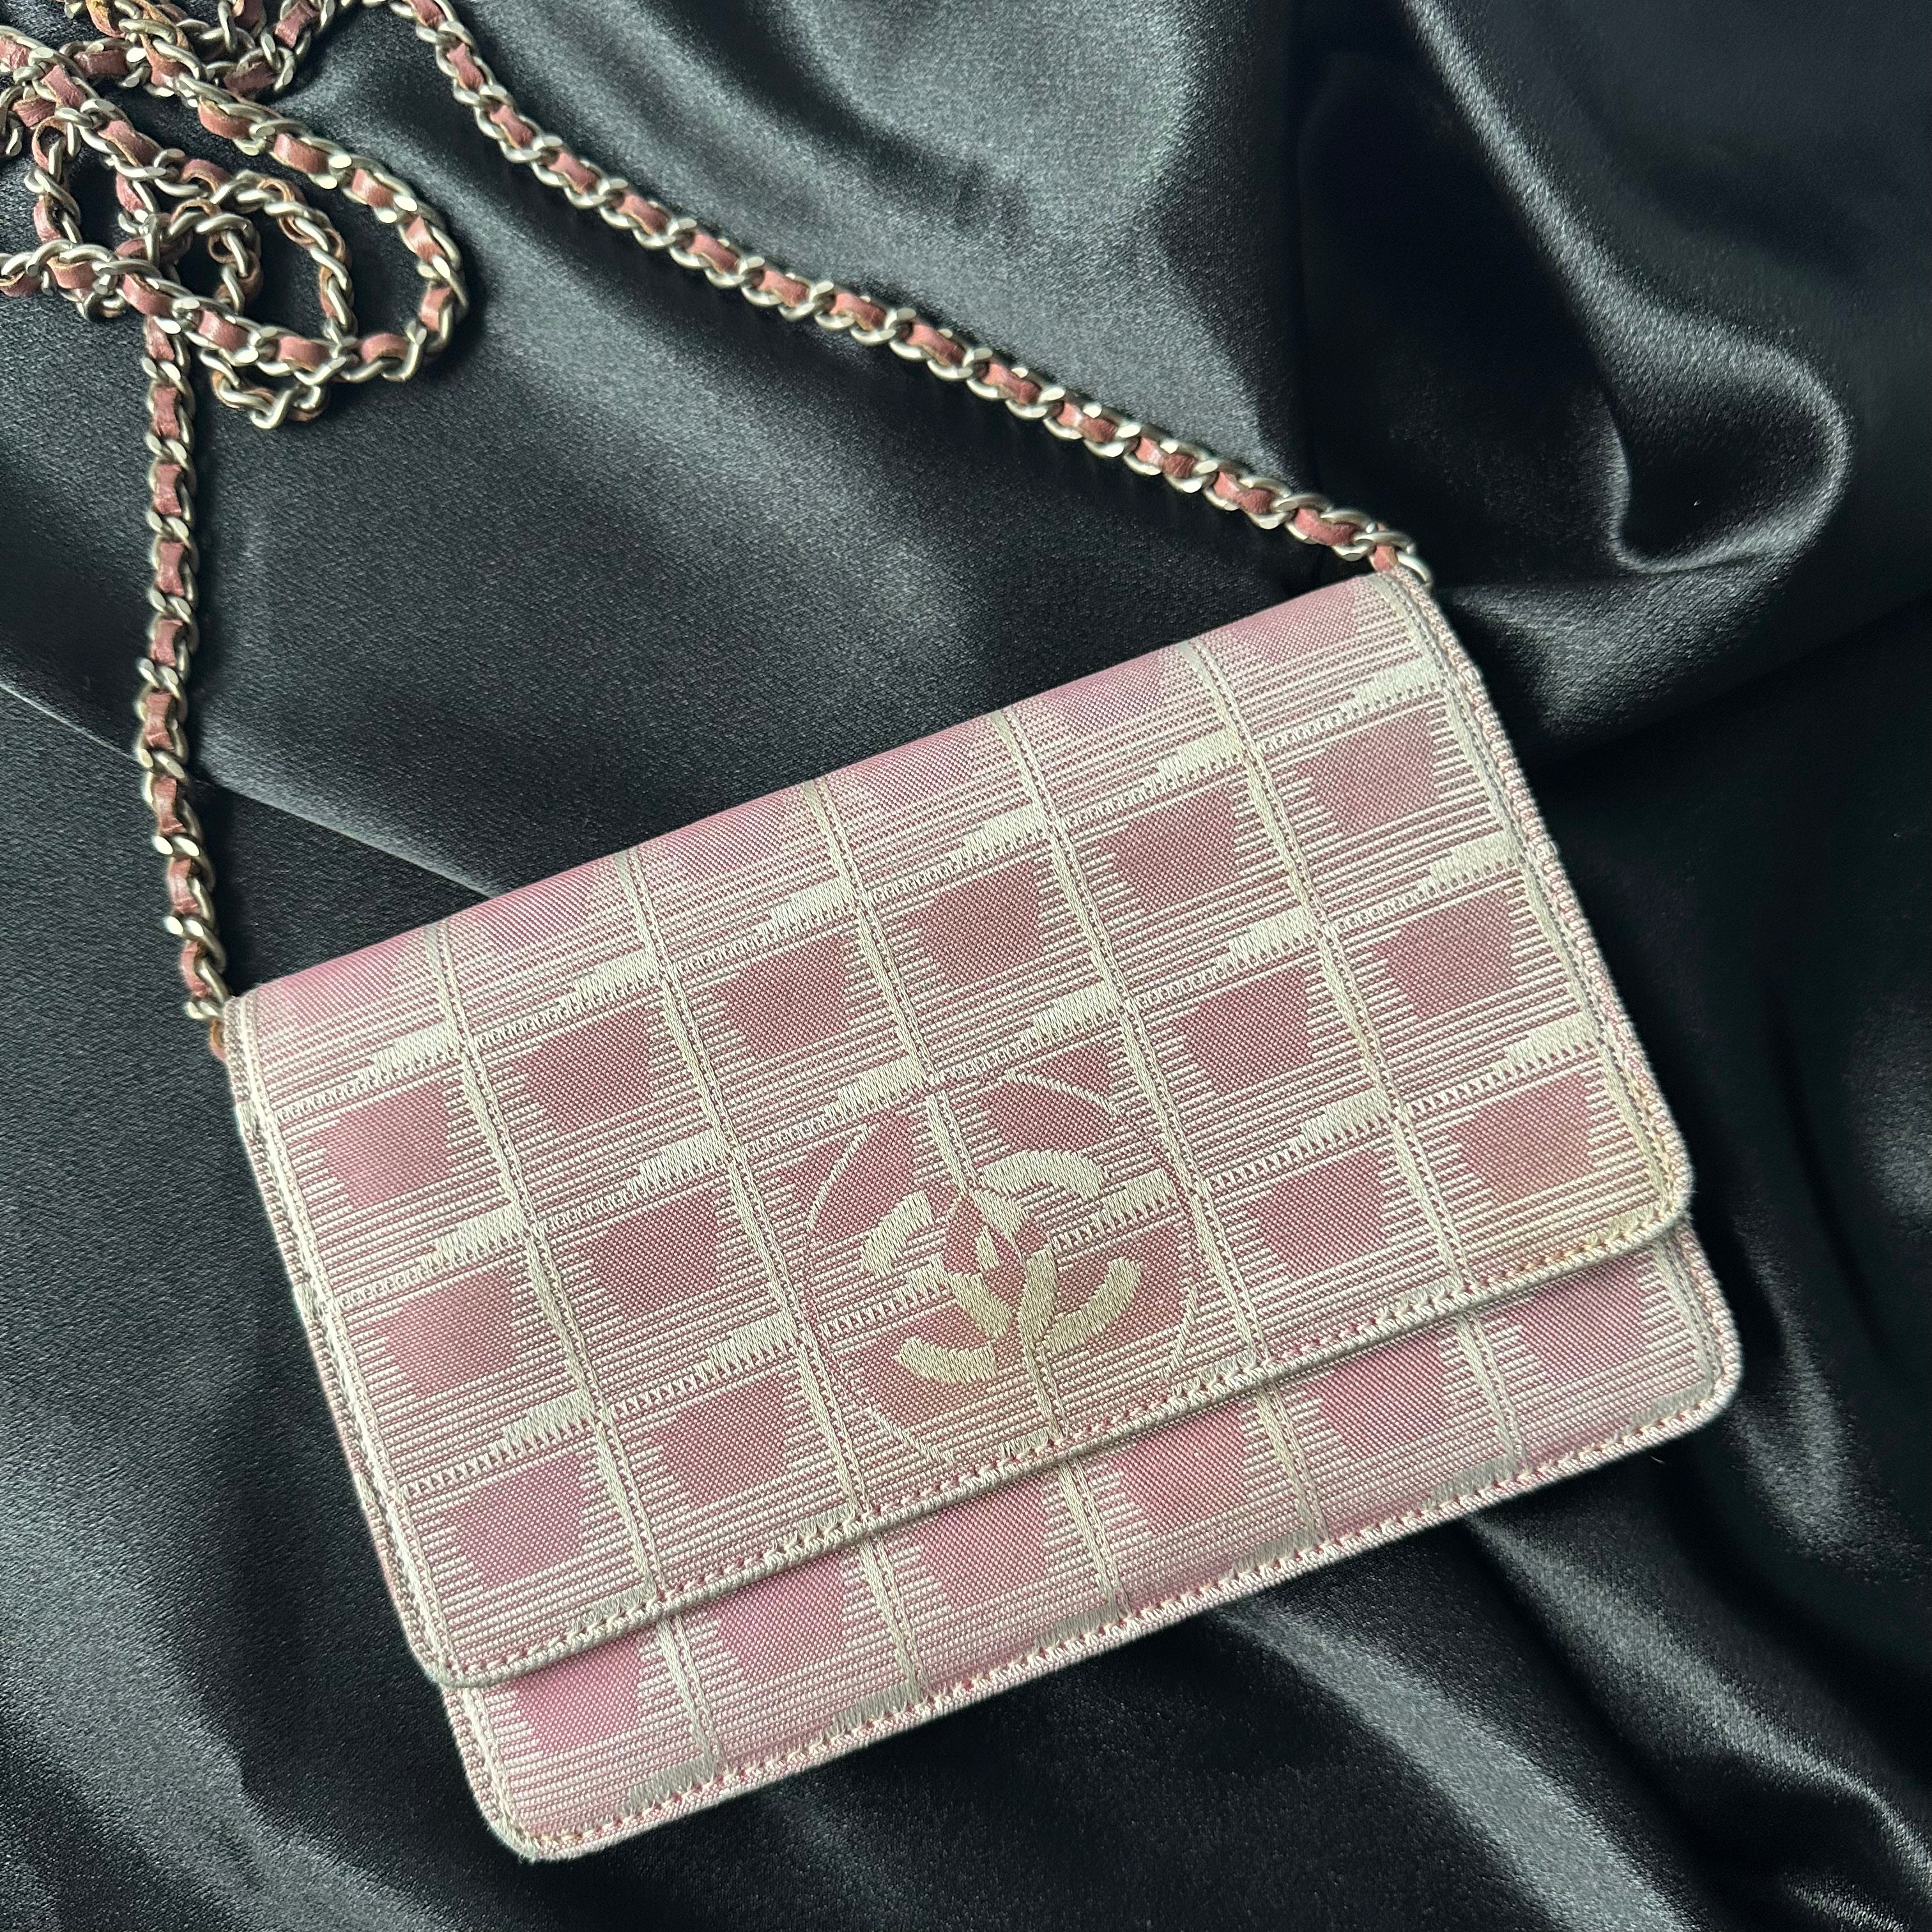 Authentic Chanel Pink Camellia Lambskin Leather Wallet on Chain/Clutch Bag